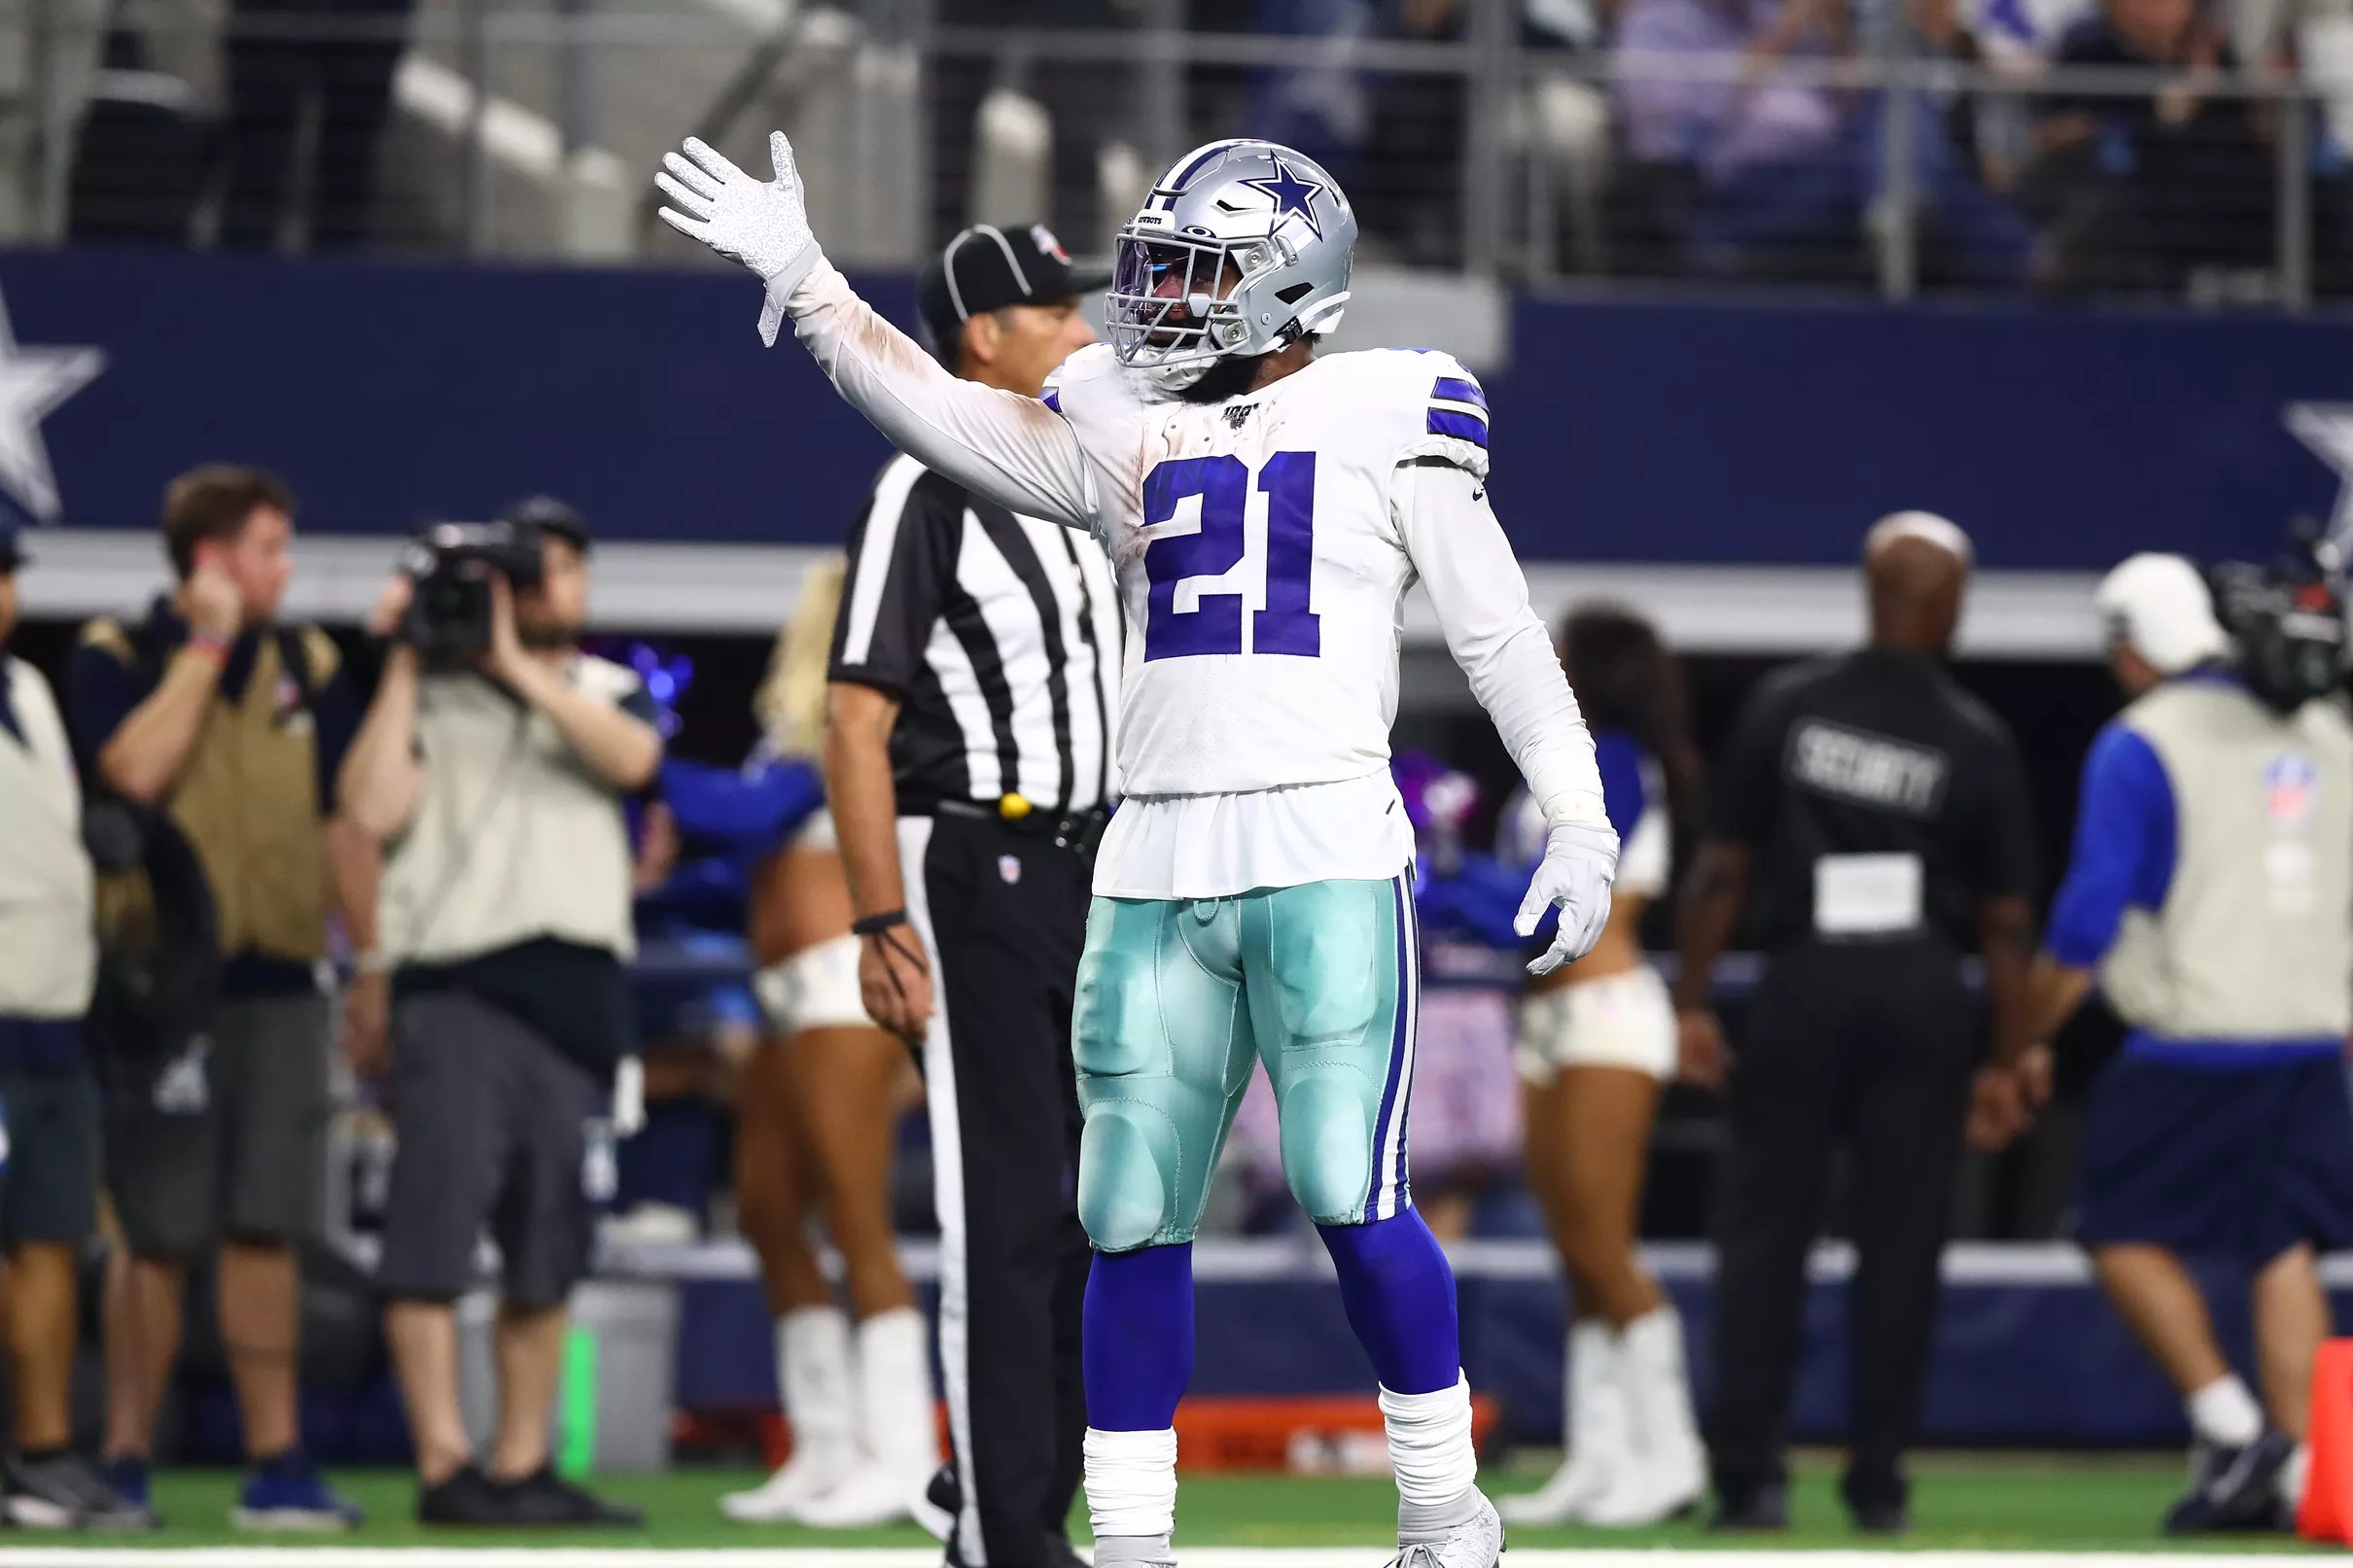 Grading the Cowboys 3710 victory over the Eagles